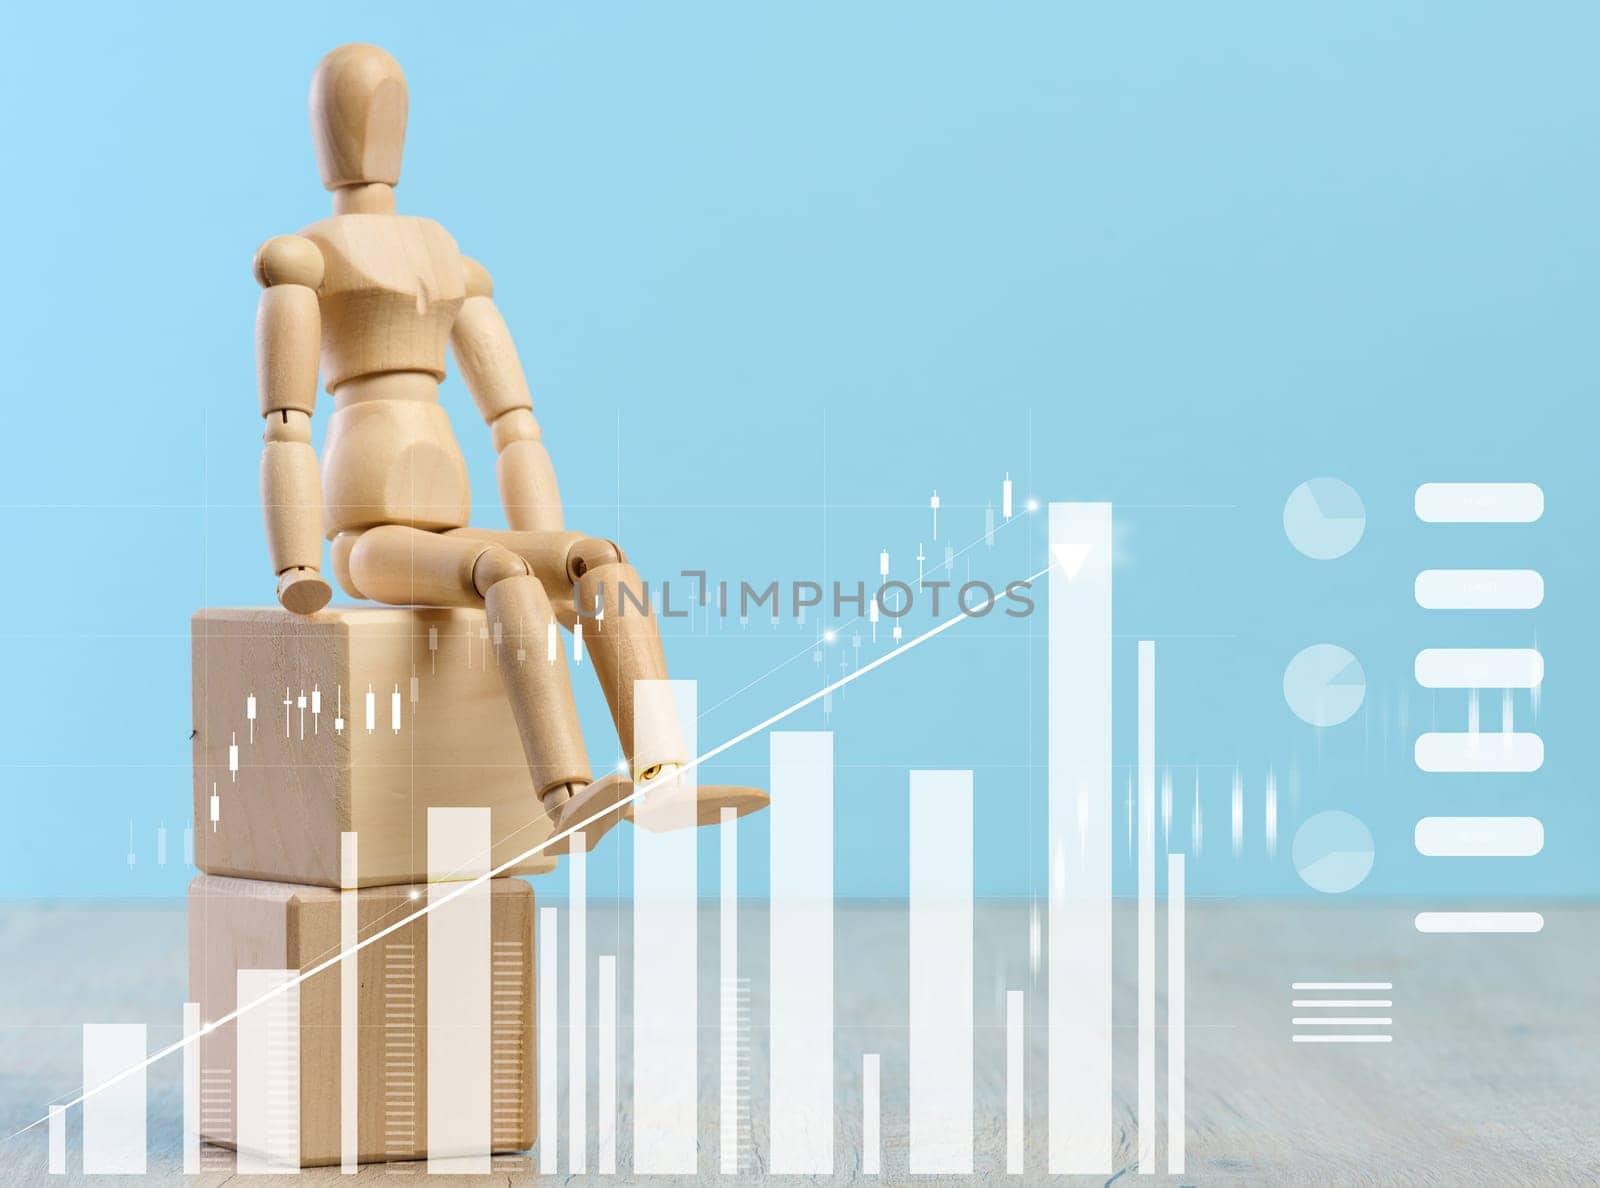 Wooden mannequin and graph with growing indicators on a blue background. Analysis of financial indicators in business, income growth